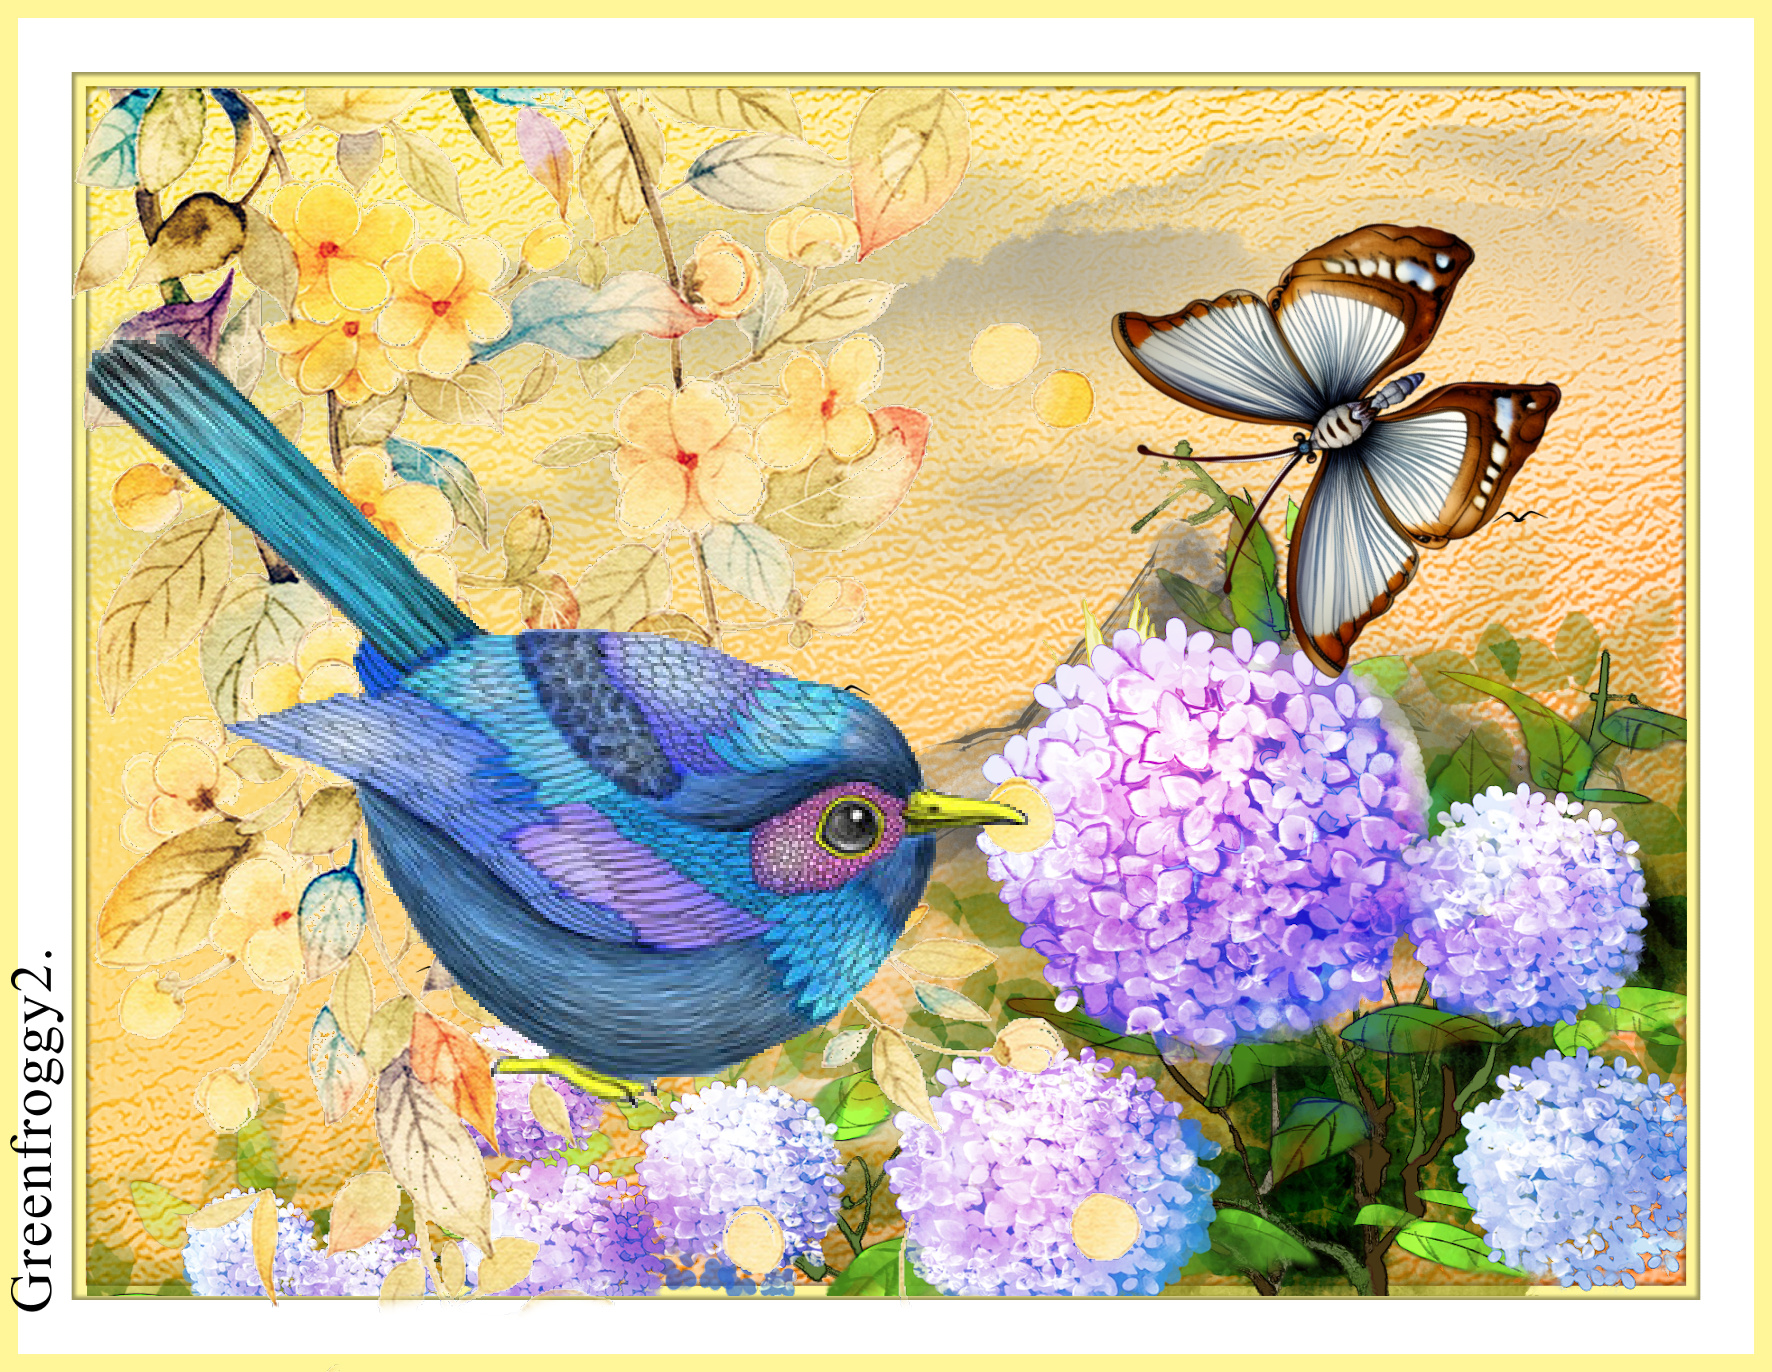 BIRD AND BUTTERFLY by GREENFROGGY1